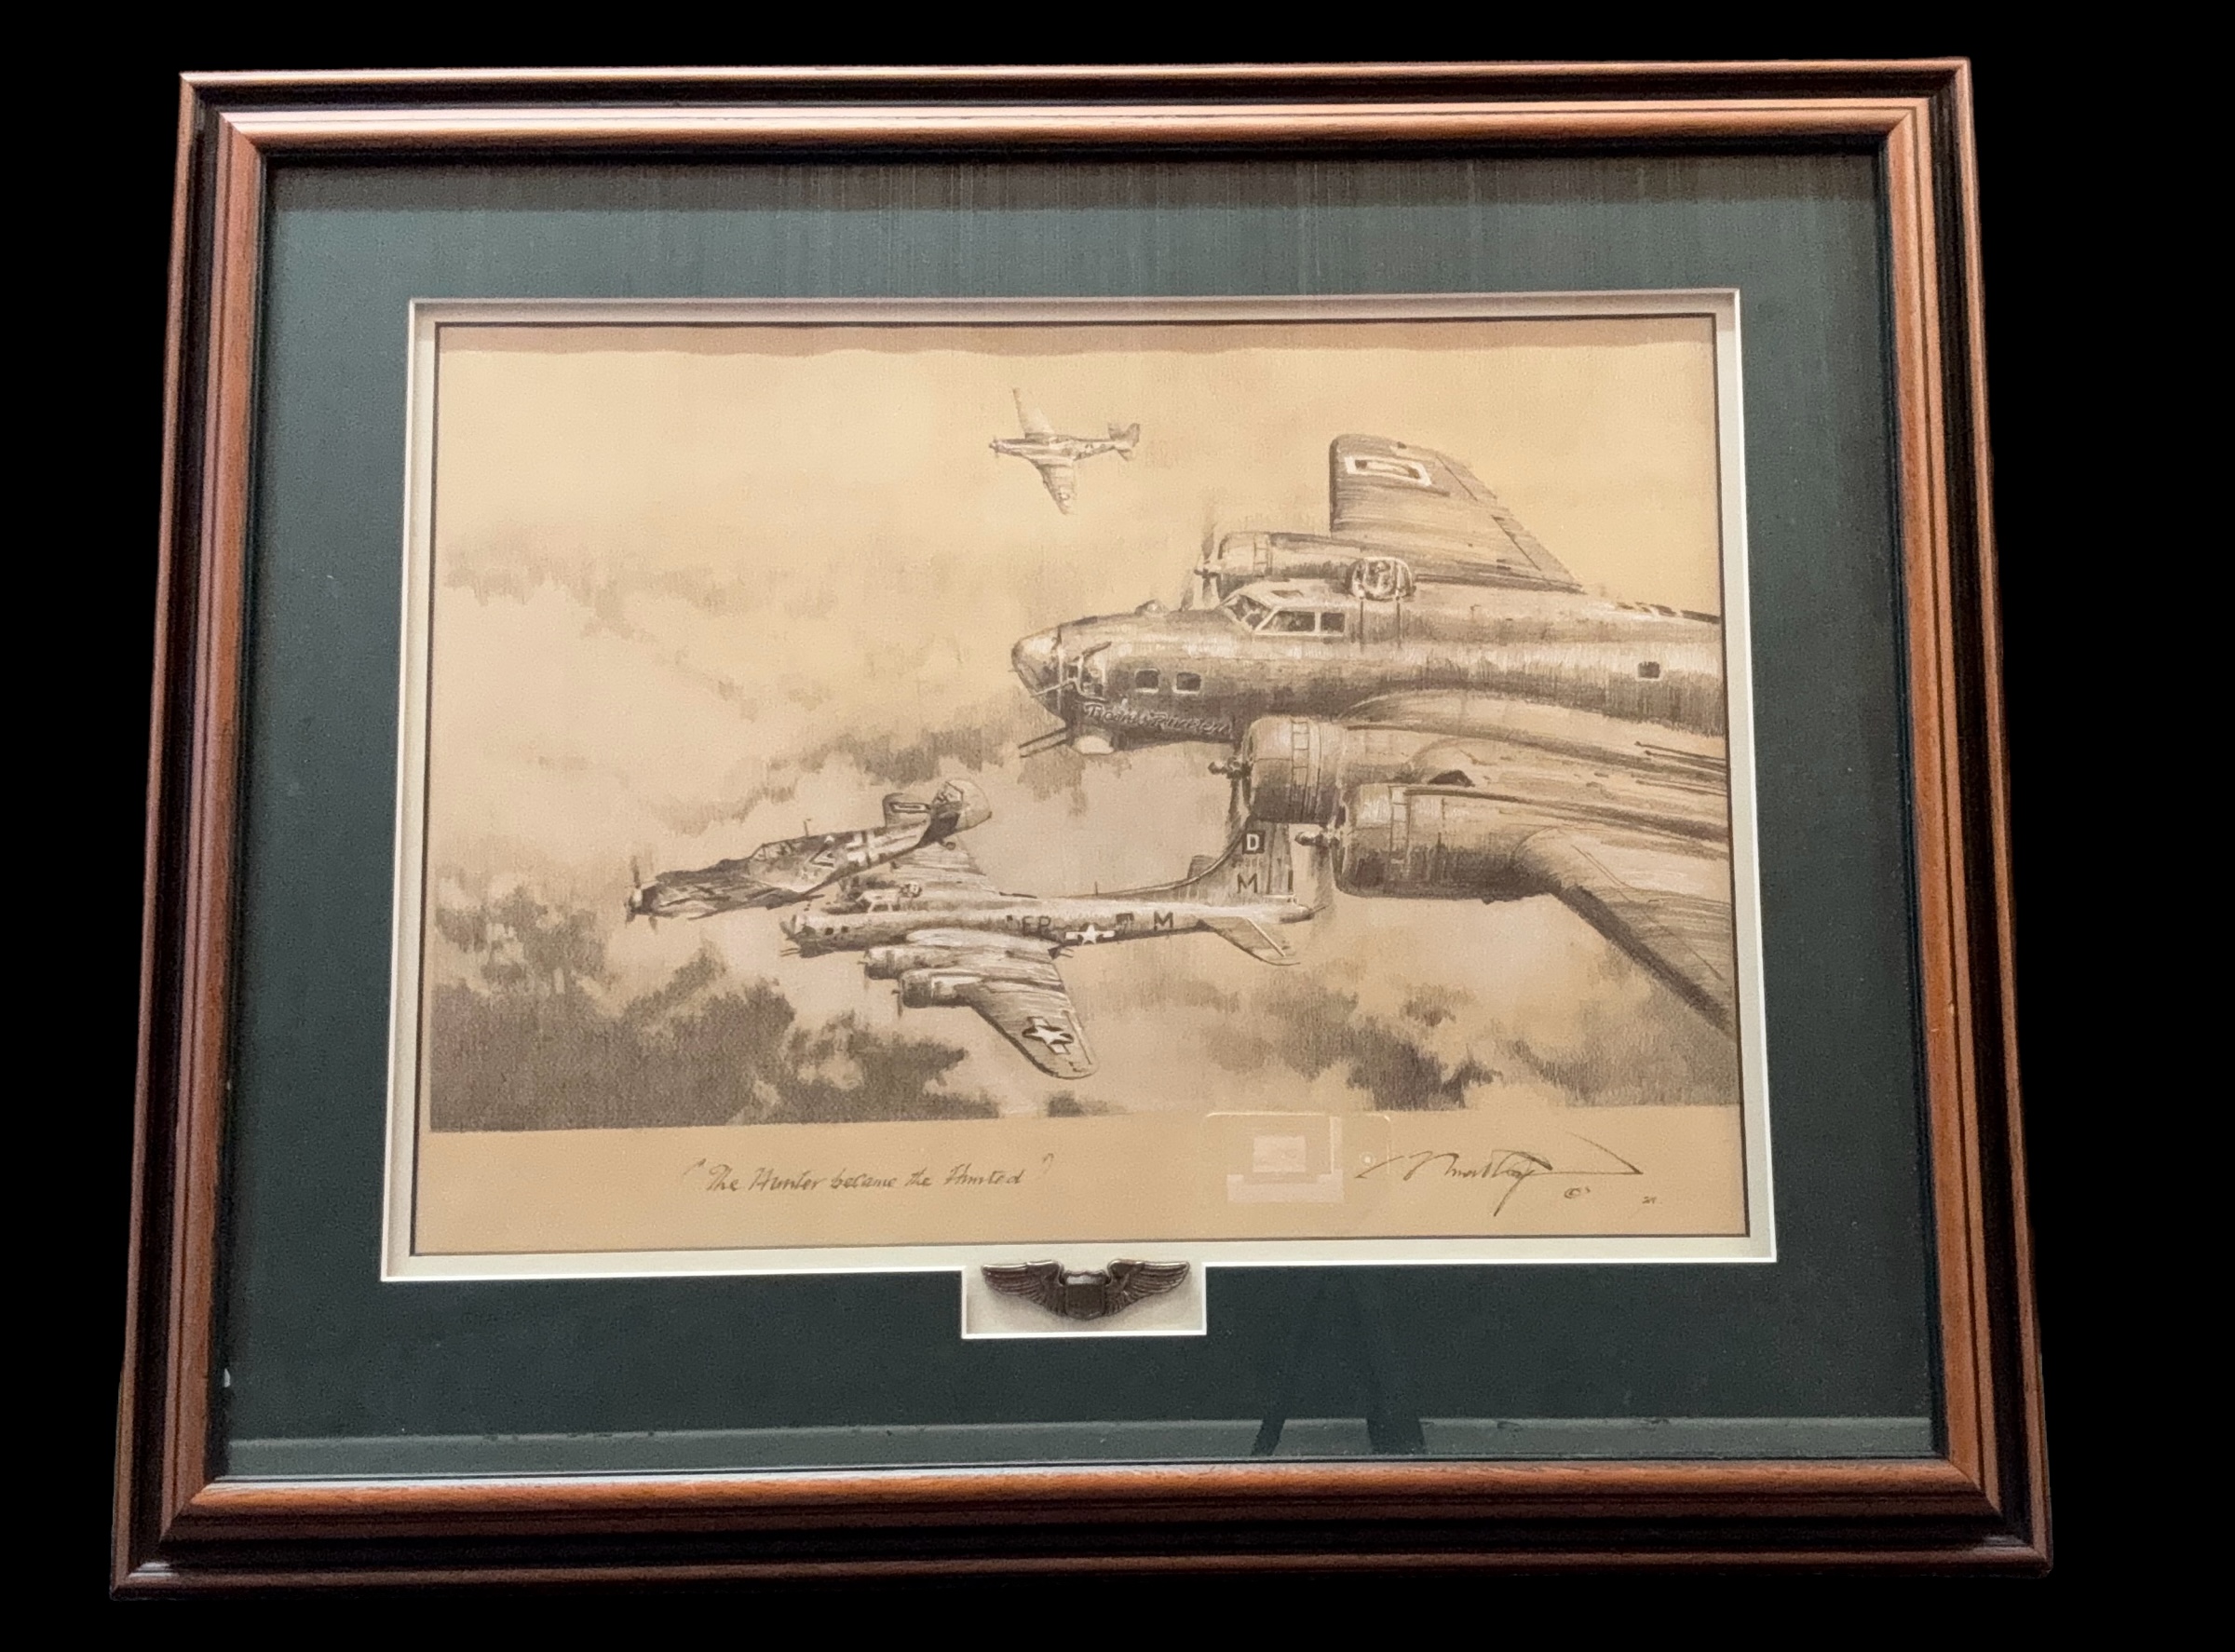 The Hunter became the Hunted WWII 28X24 inch framed and mounted print signed in pencil by the artist